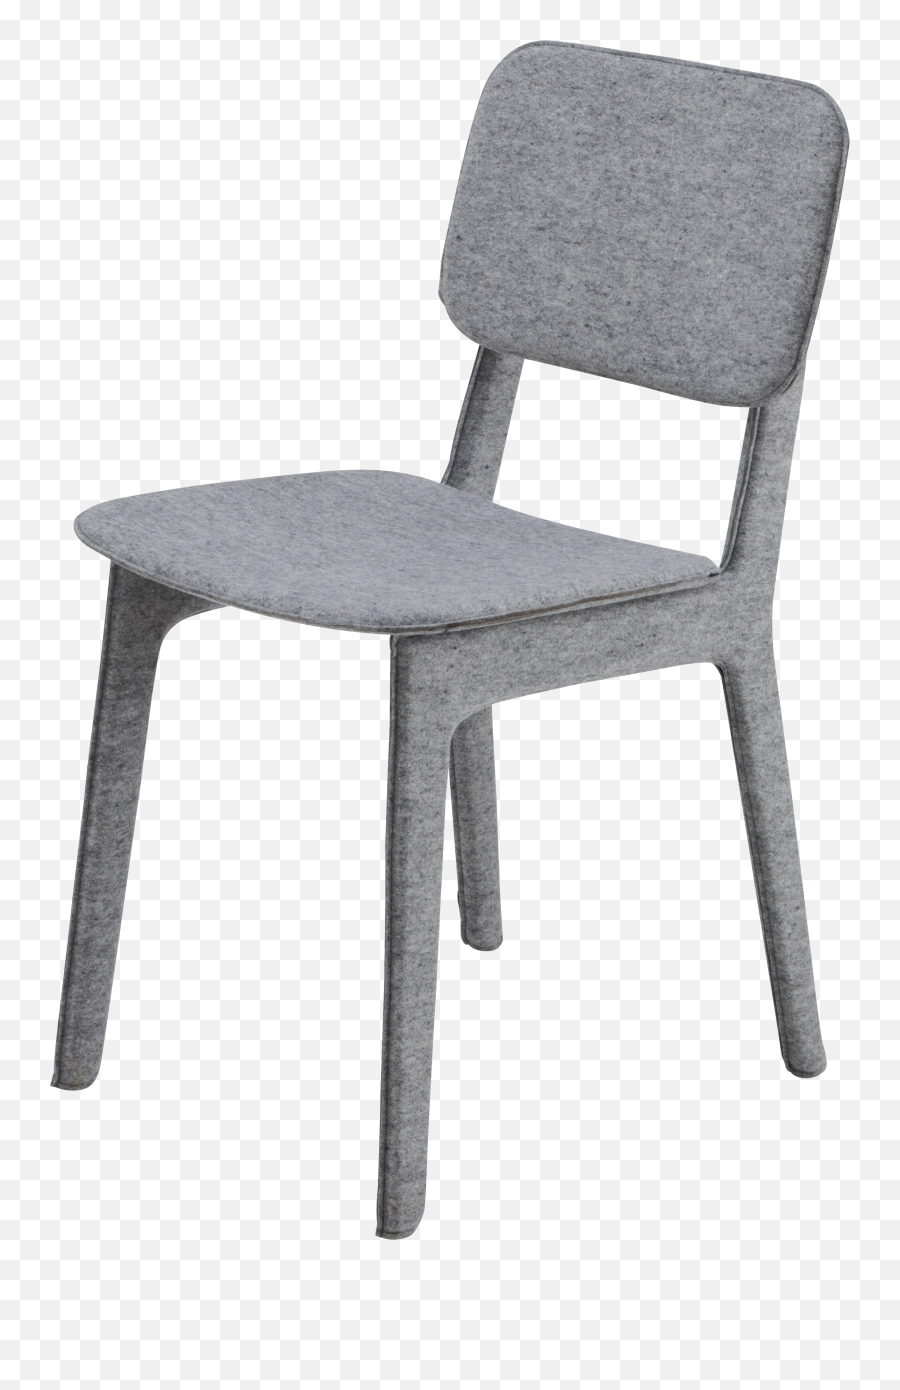 Download Chair Png Image For Free - Transparent Background Chair Transparent,Seat Png